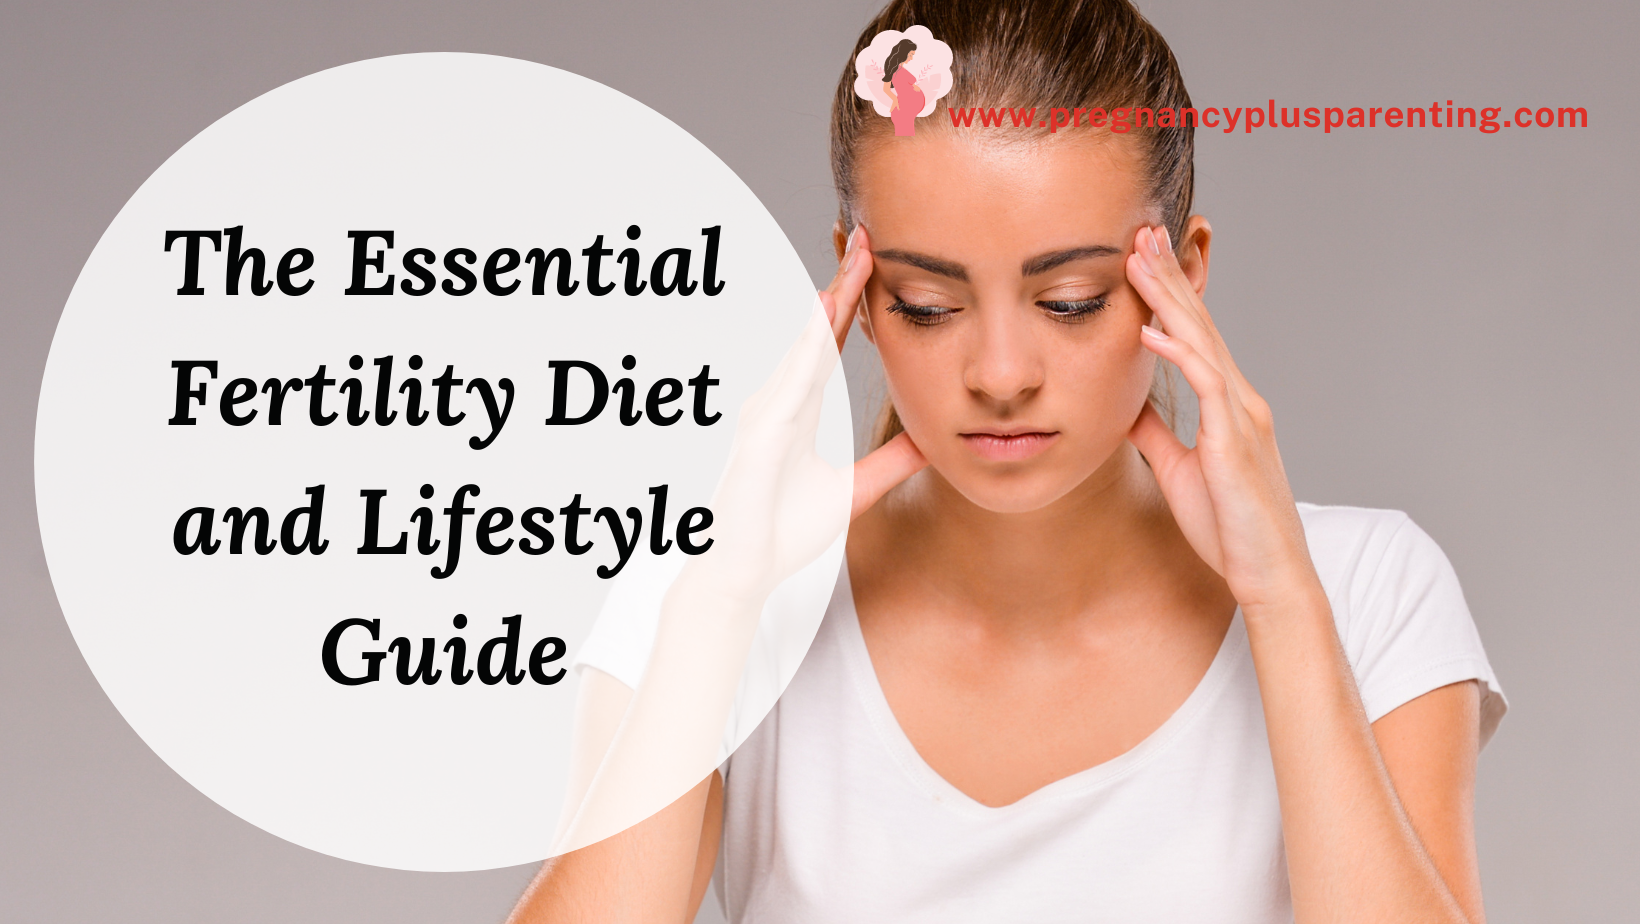 The Essential Fertility Diet and Lifestyle Guide